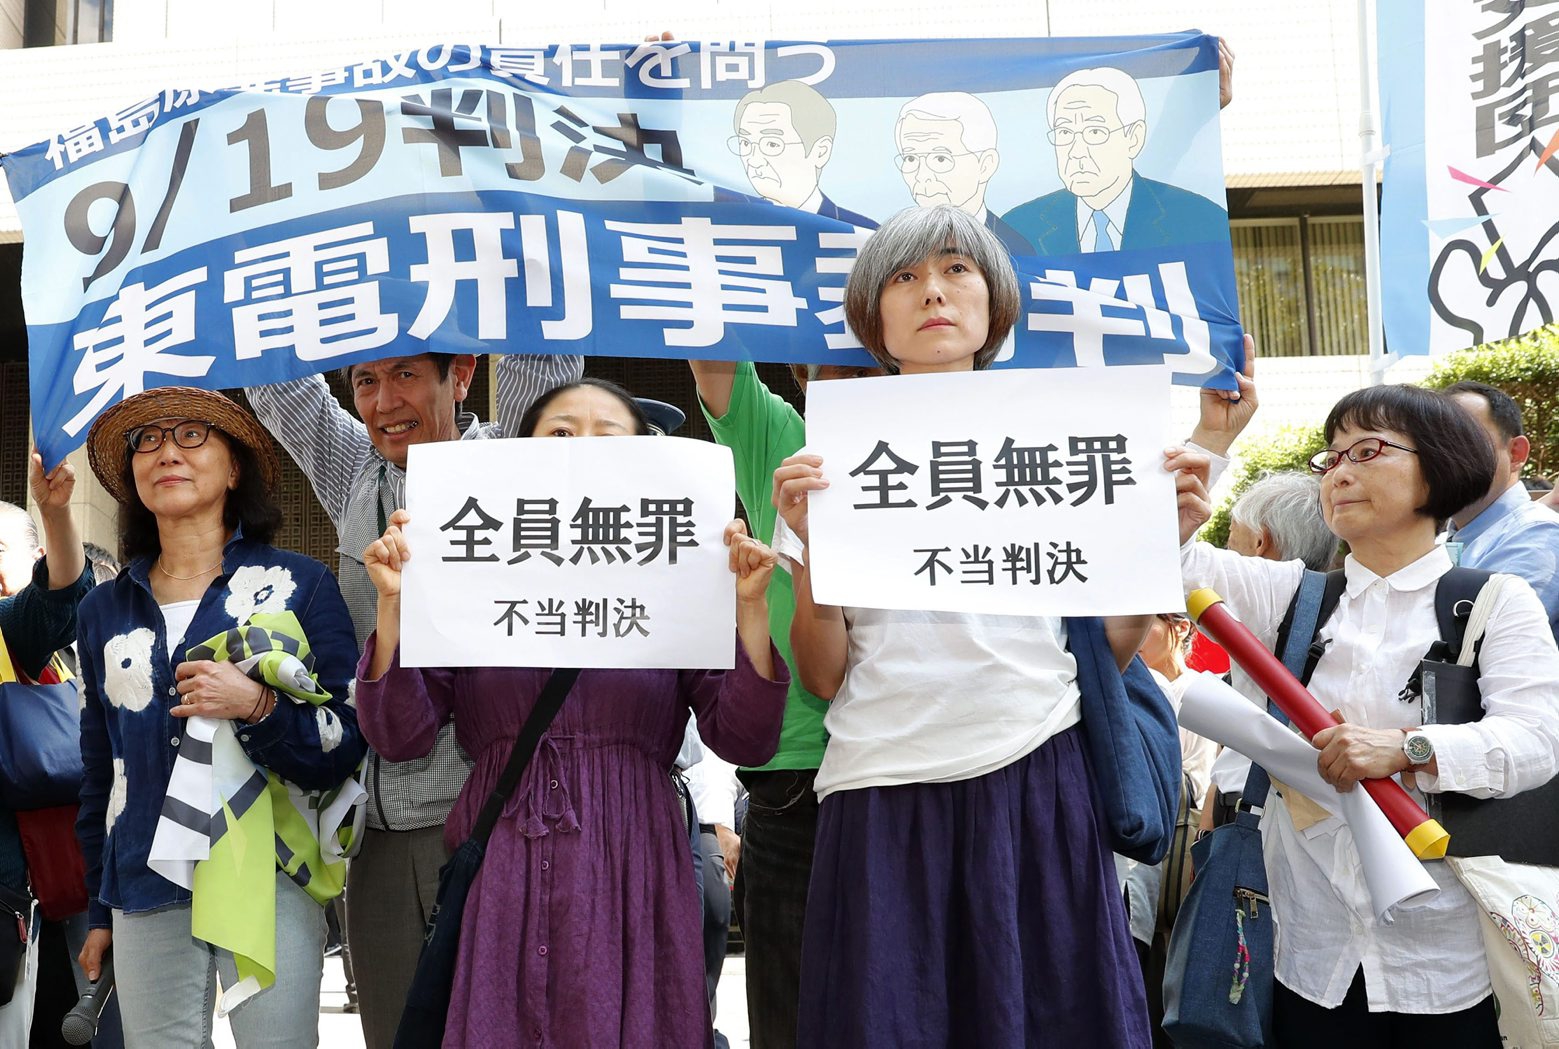 A group of supporters of the trial shows banners reading "unjust sentence" in front of Tokyo District Court in Tokyo Thursday, Sept. 19, 2019. The court on Thursday ruled that three former executives for Tokyo Electric Power Company were not guilty of professional negligence in the 2011 Fukushima meltdown. It was the only criminal trial in the nuclear disaster that has kept tens of thousands of residents away from their homes because of lingering radiation contamination. (Satoru Yonemaru/Kyodo News via AP) Japan Nuclear Disaster